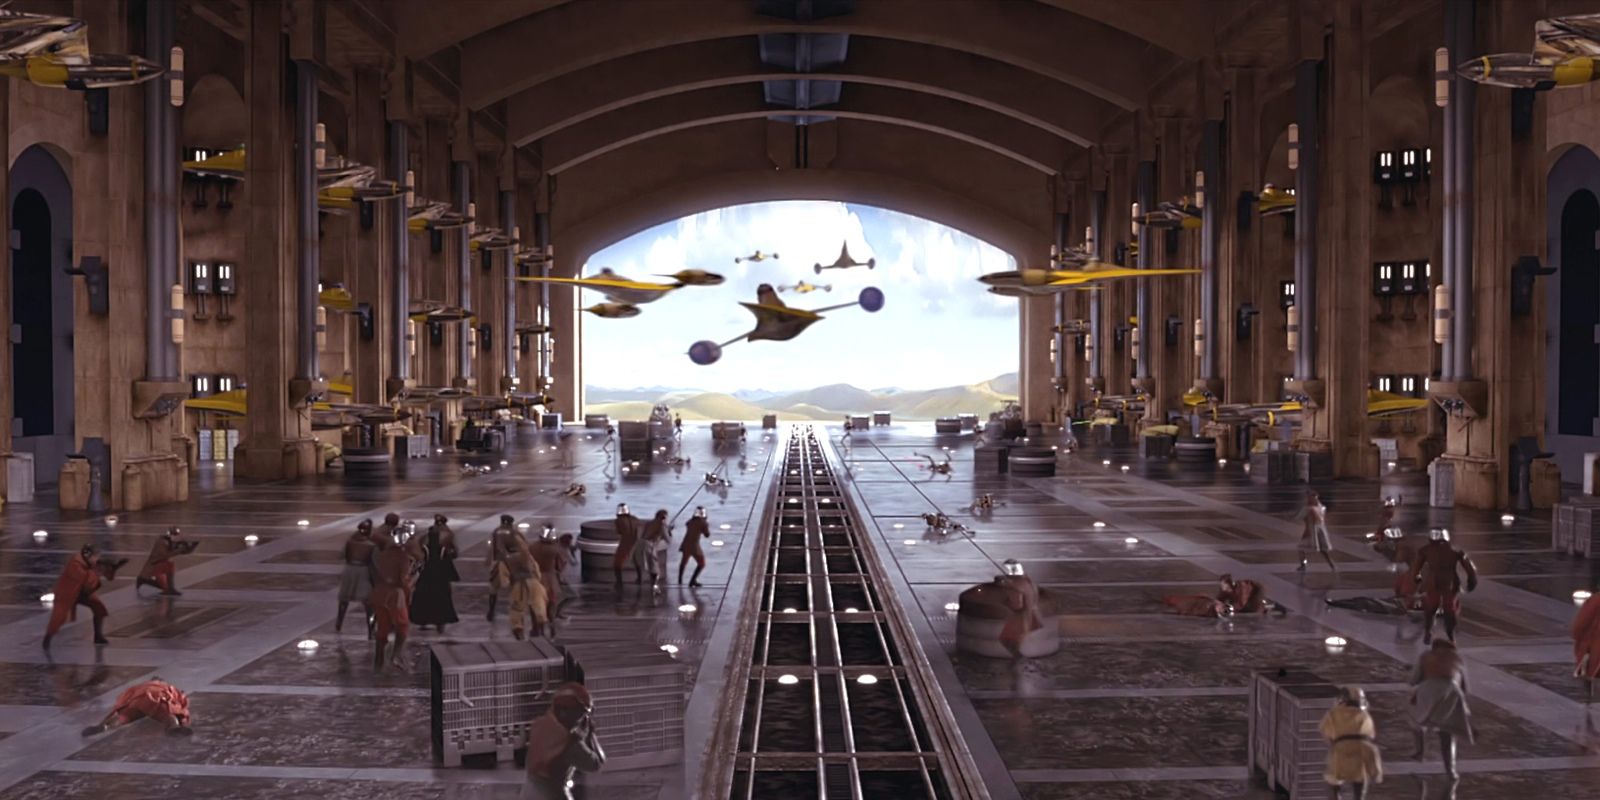 N-1 Starfighters take off from the Theed hangar during the Battle of Naboo in Star Wars The Phantom Menace.